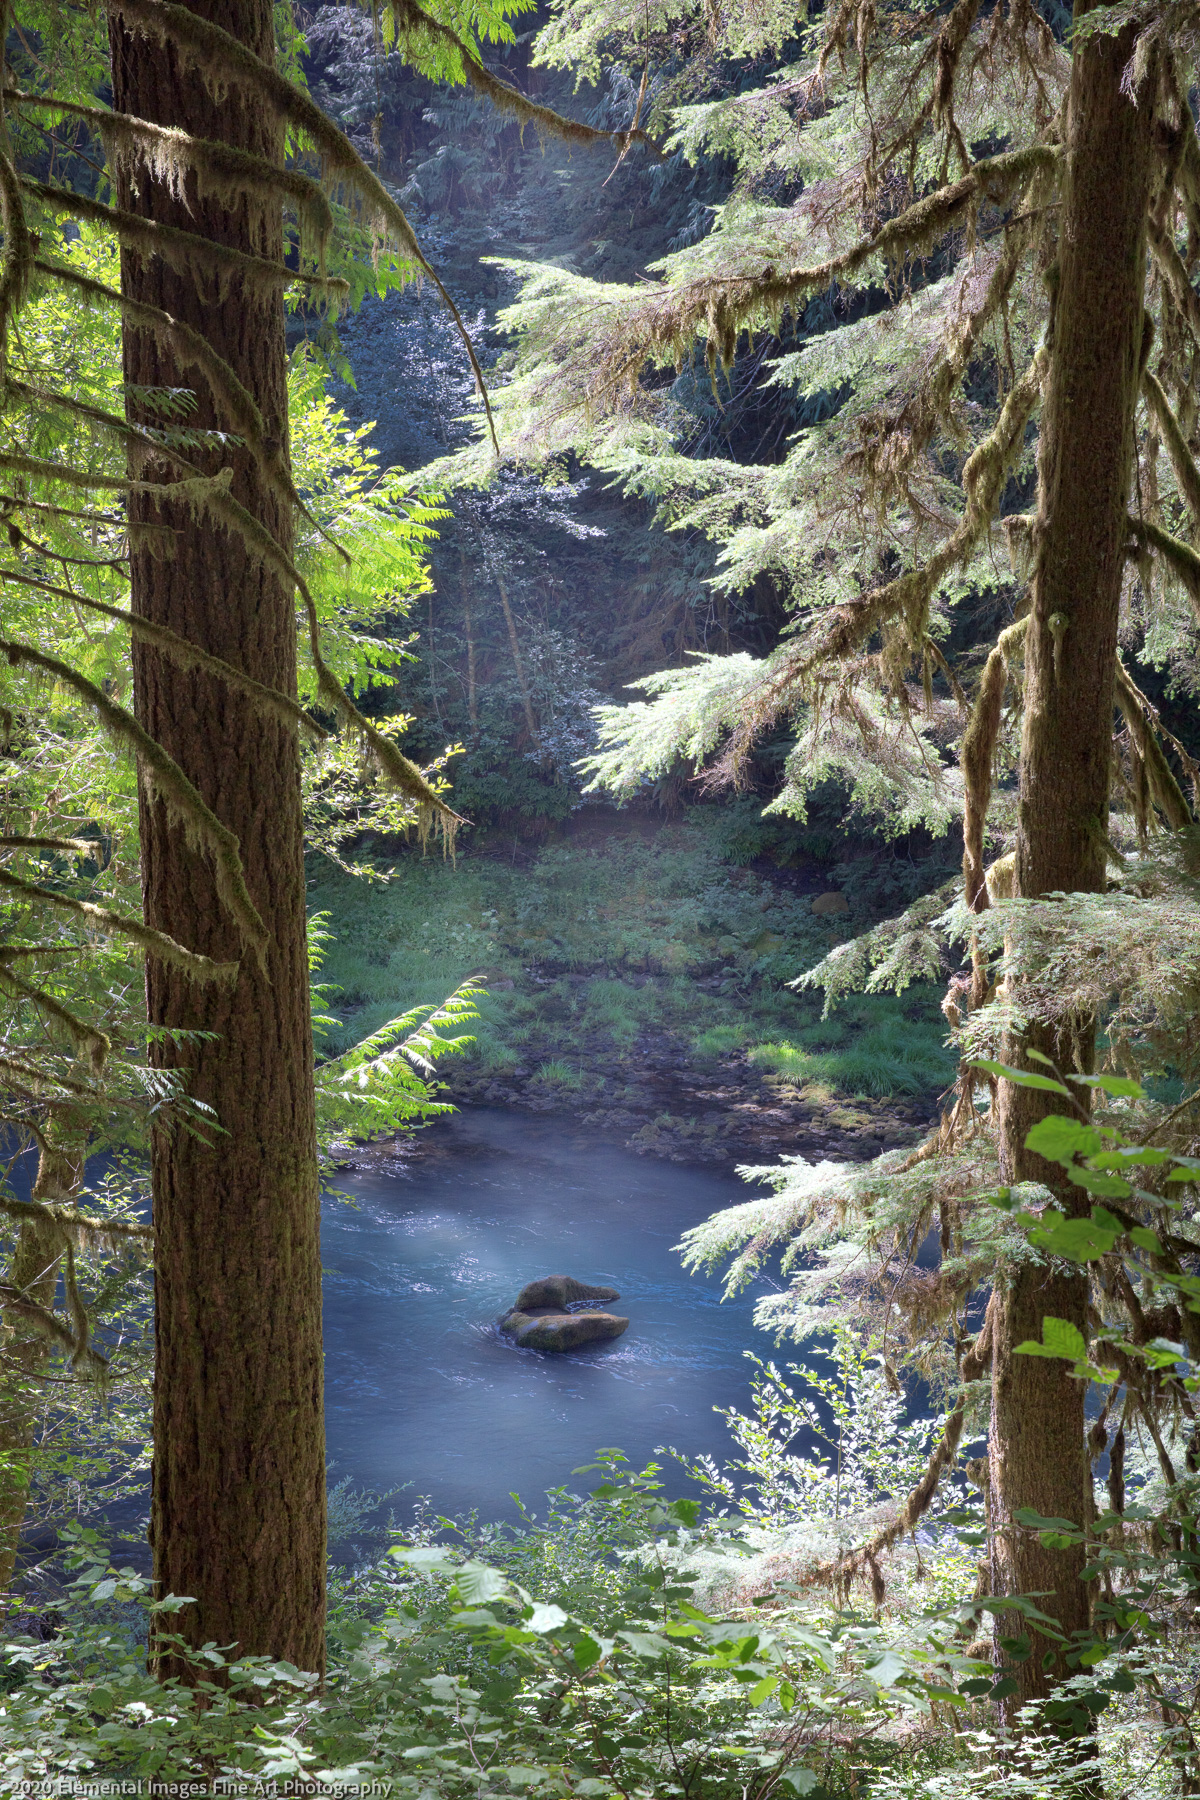 View to Lewis River | Gifford Pinchot National Forest | WA | USA - © 2020 Elemental Images Fine Art Photography - All Rights Reserved Worldwide